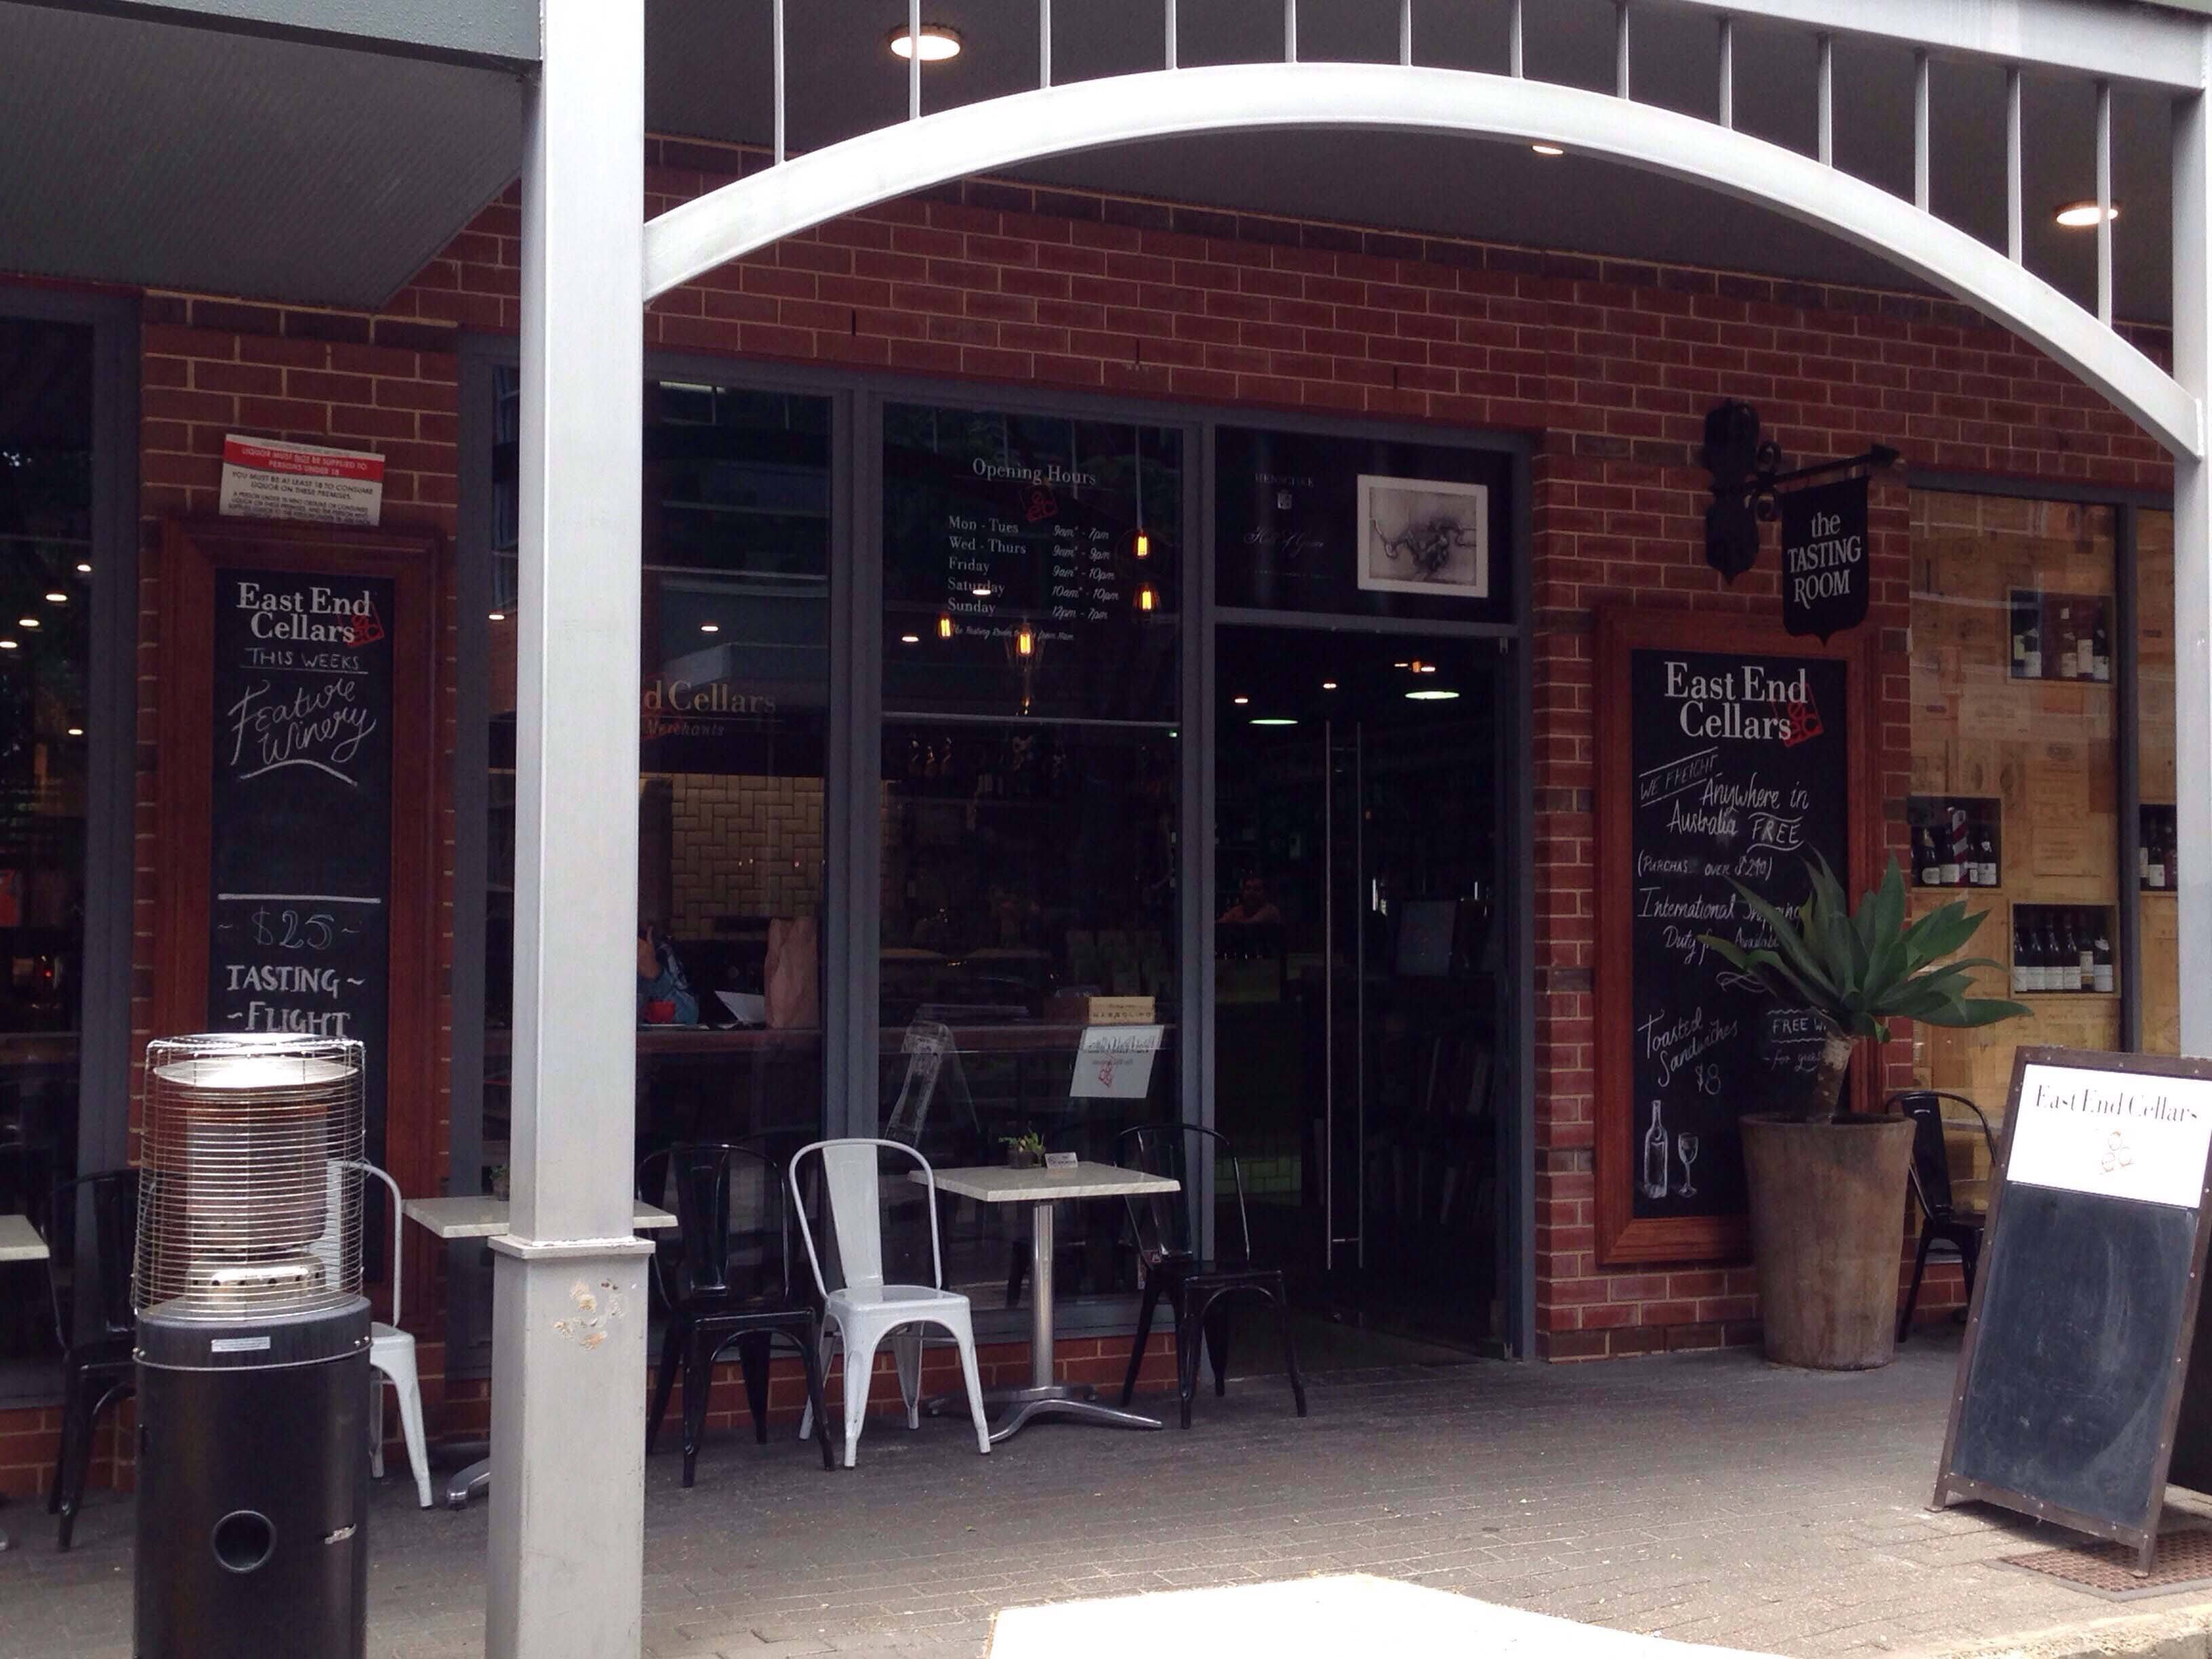 East End Cellars The Tasting Room City Centre Adelaide